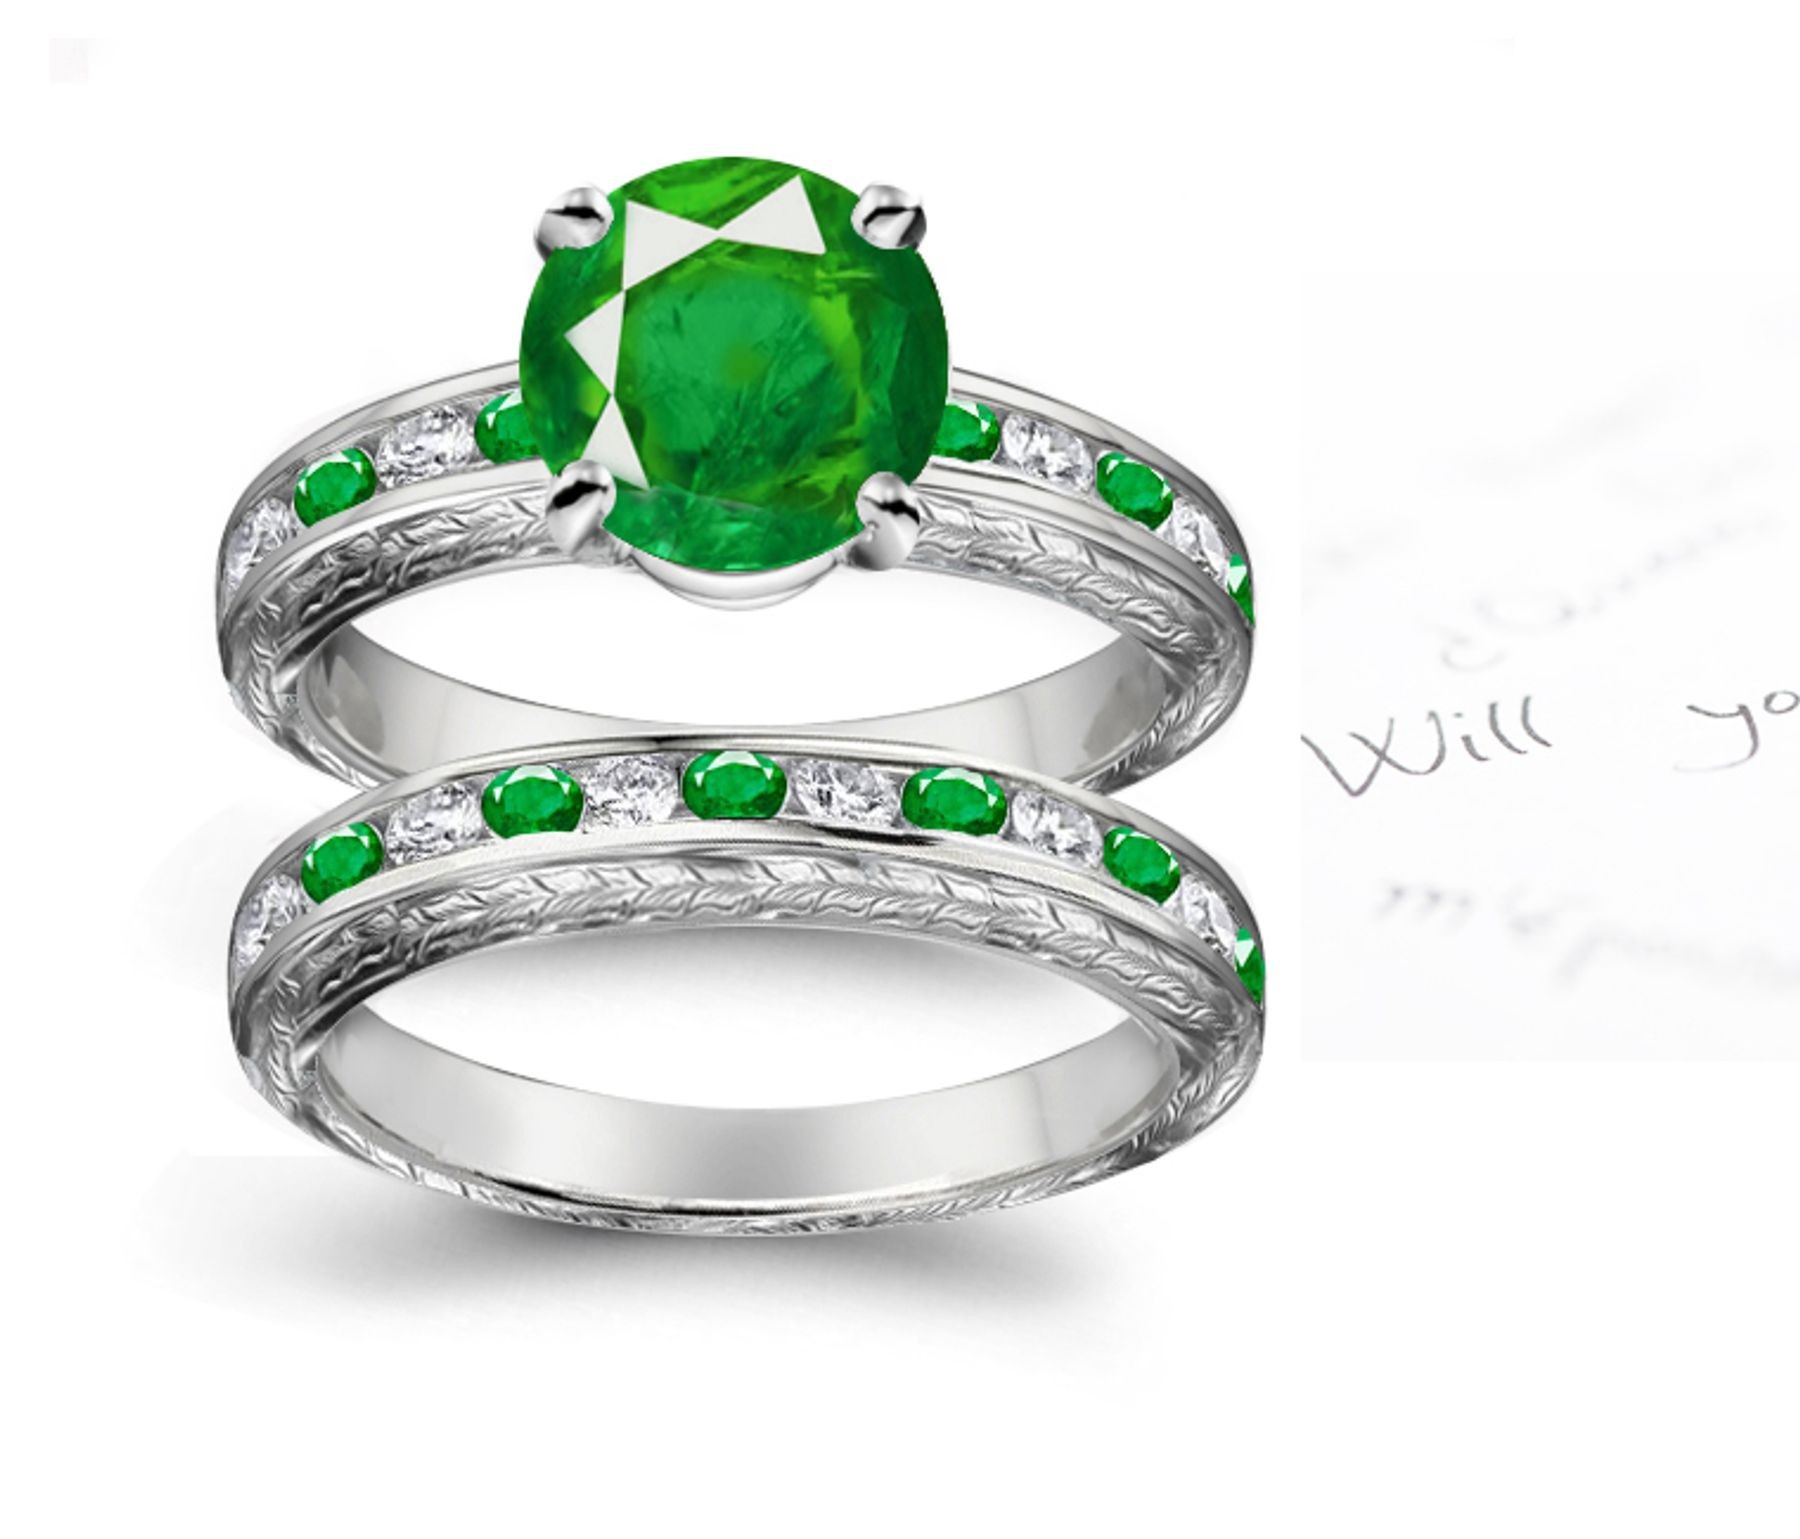 Examples of This Unique: Channel Set Filigree Store of Fine Emeralds With Diamonds Ring in 14k White Gold & Platinum